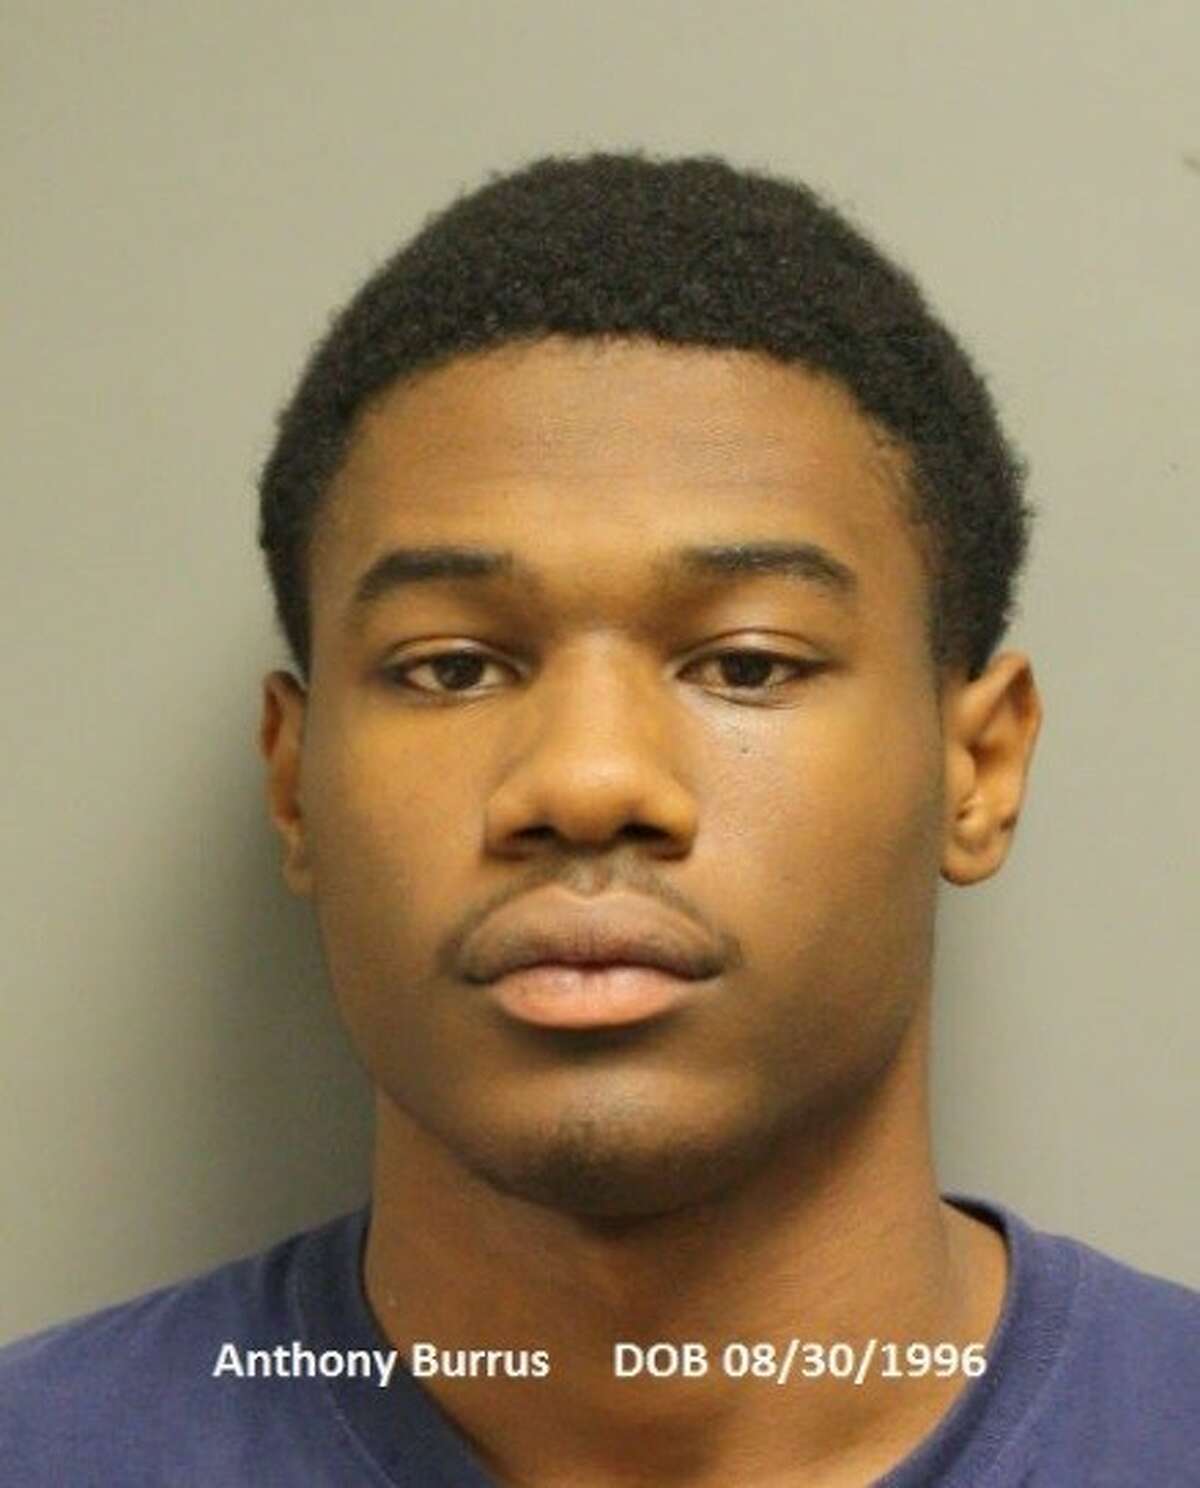 Anthony Burrus has been charged with two counts of burglary of a habitation, one county of burglary of a motor vehicle and one count of engaging in organized crime as part of an alleged robbery and burglary ring that targeted cars, homes and individuals in Harris County.